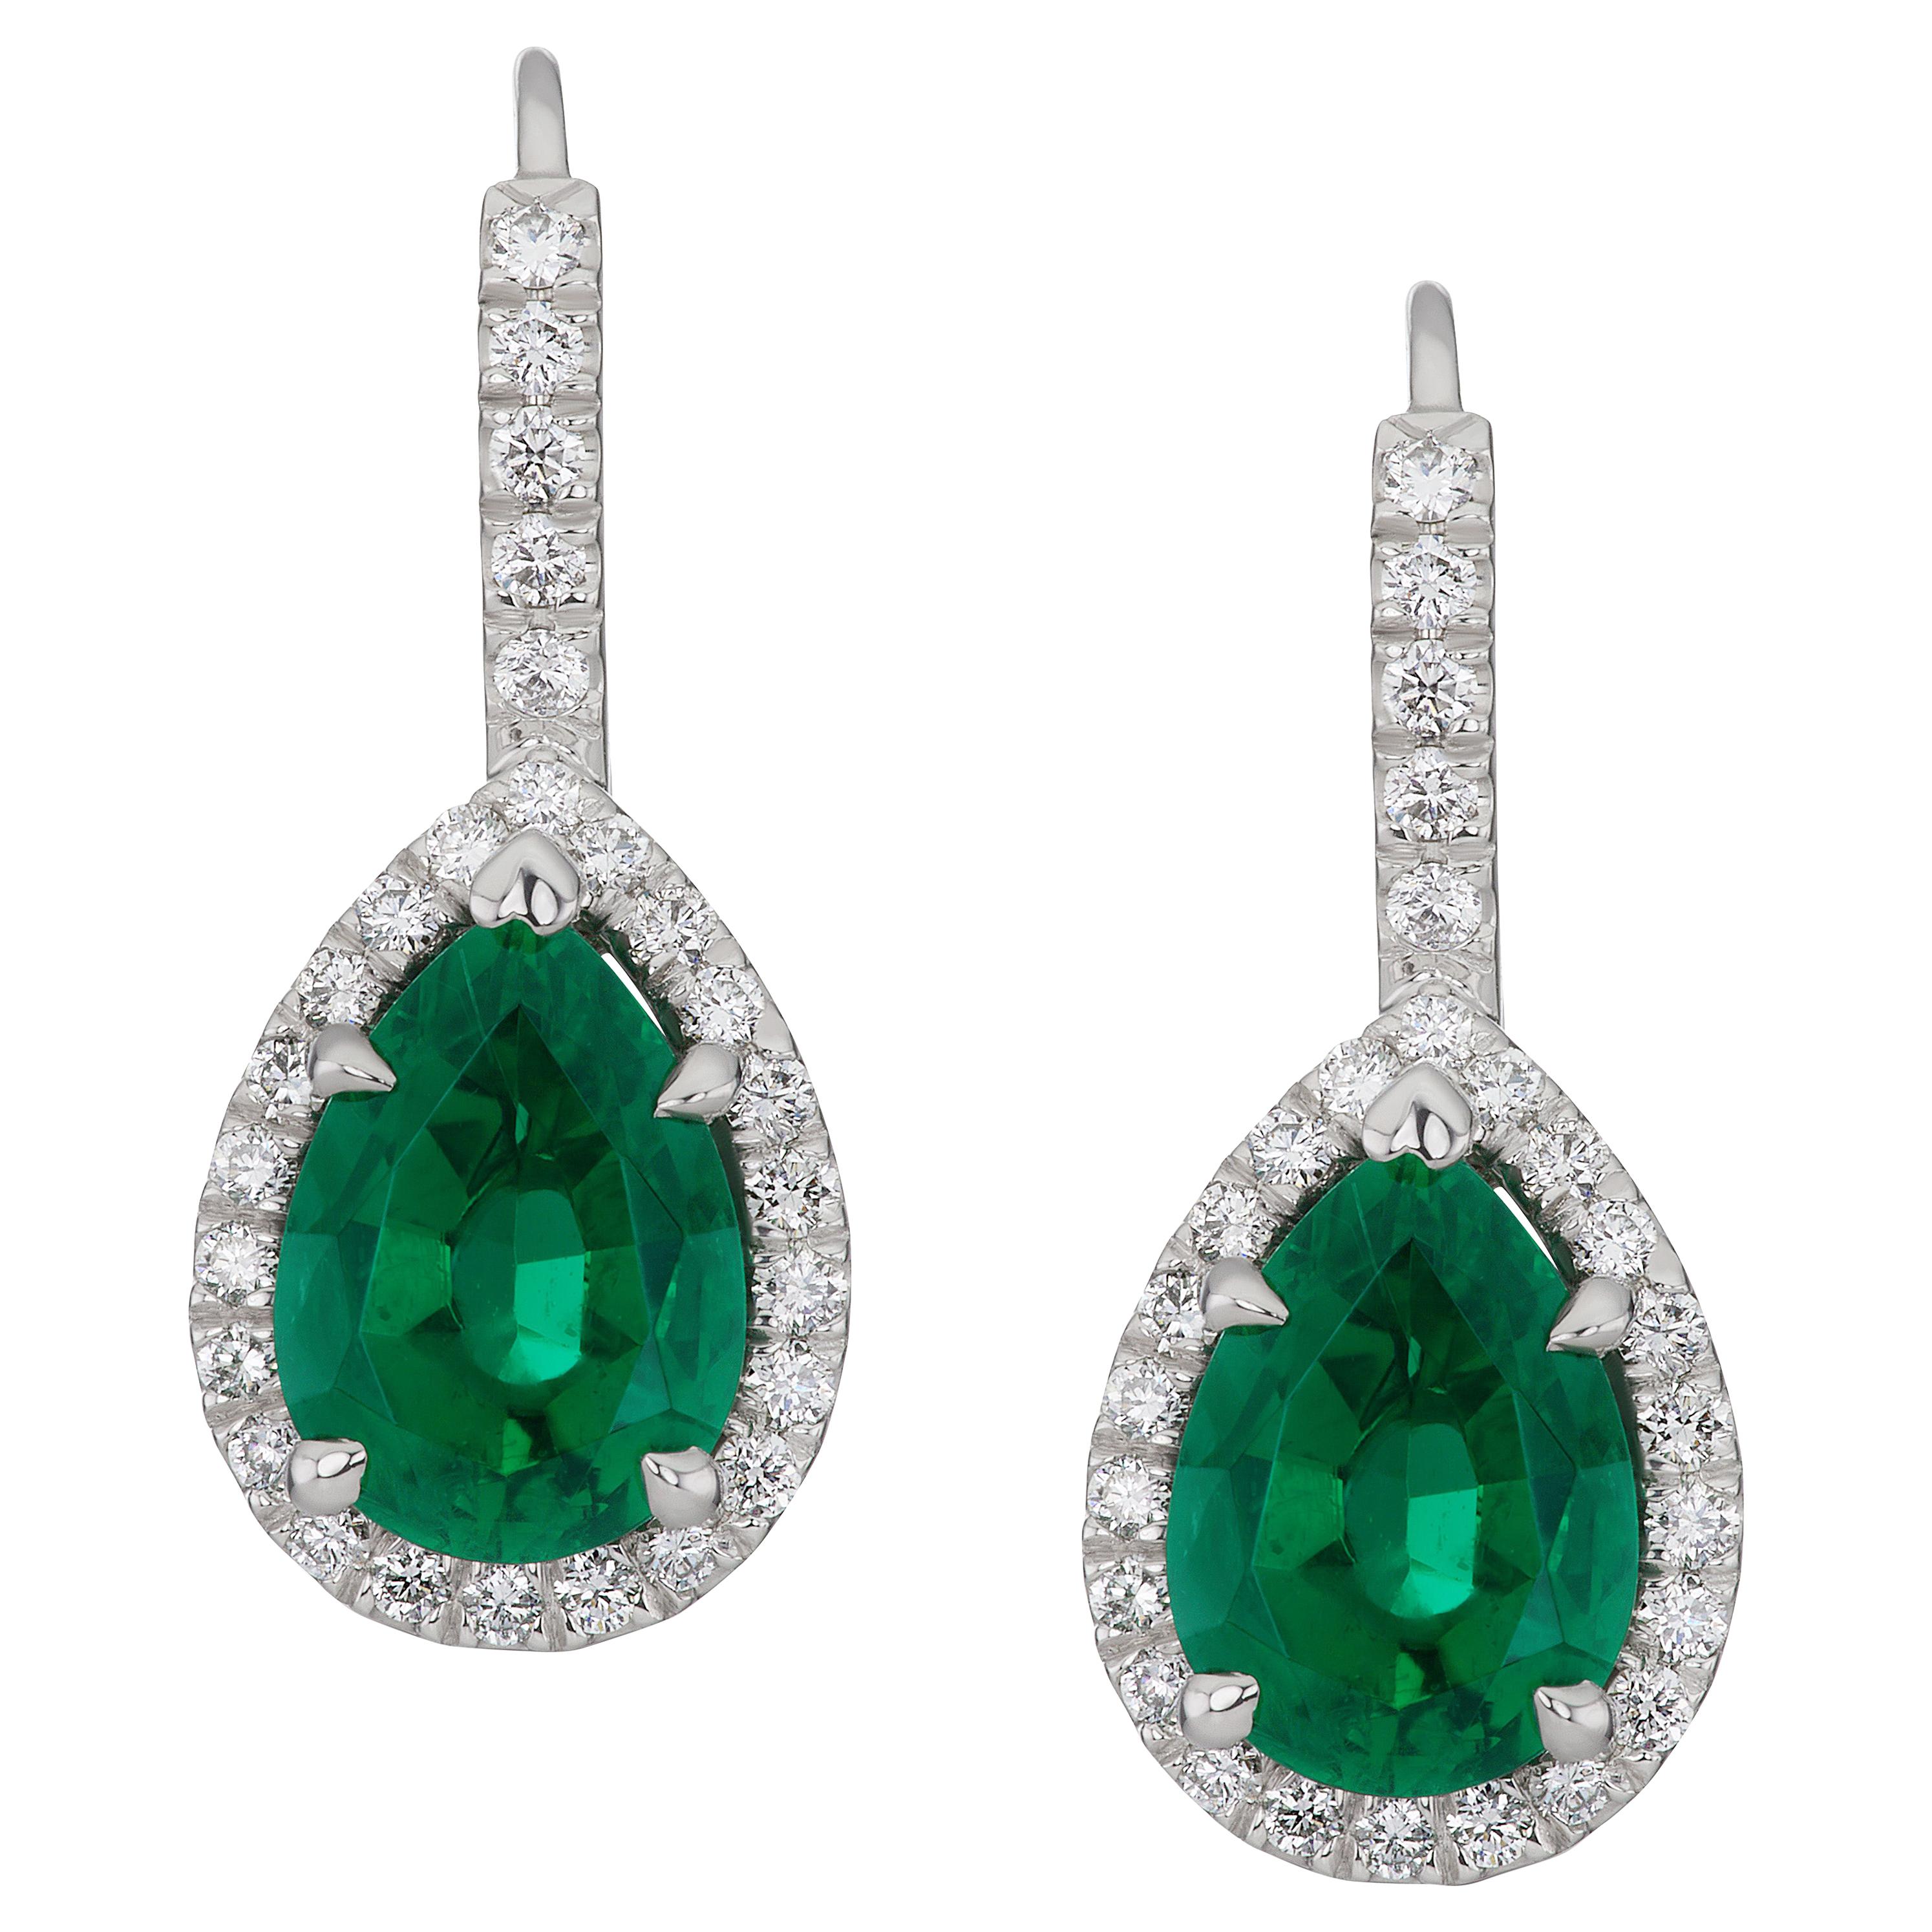 4.88 Carat African Pear Shape Emerald and Diamond Earrings with Lever Backs